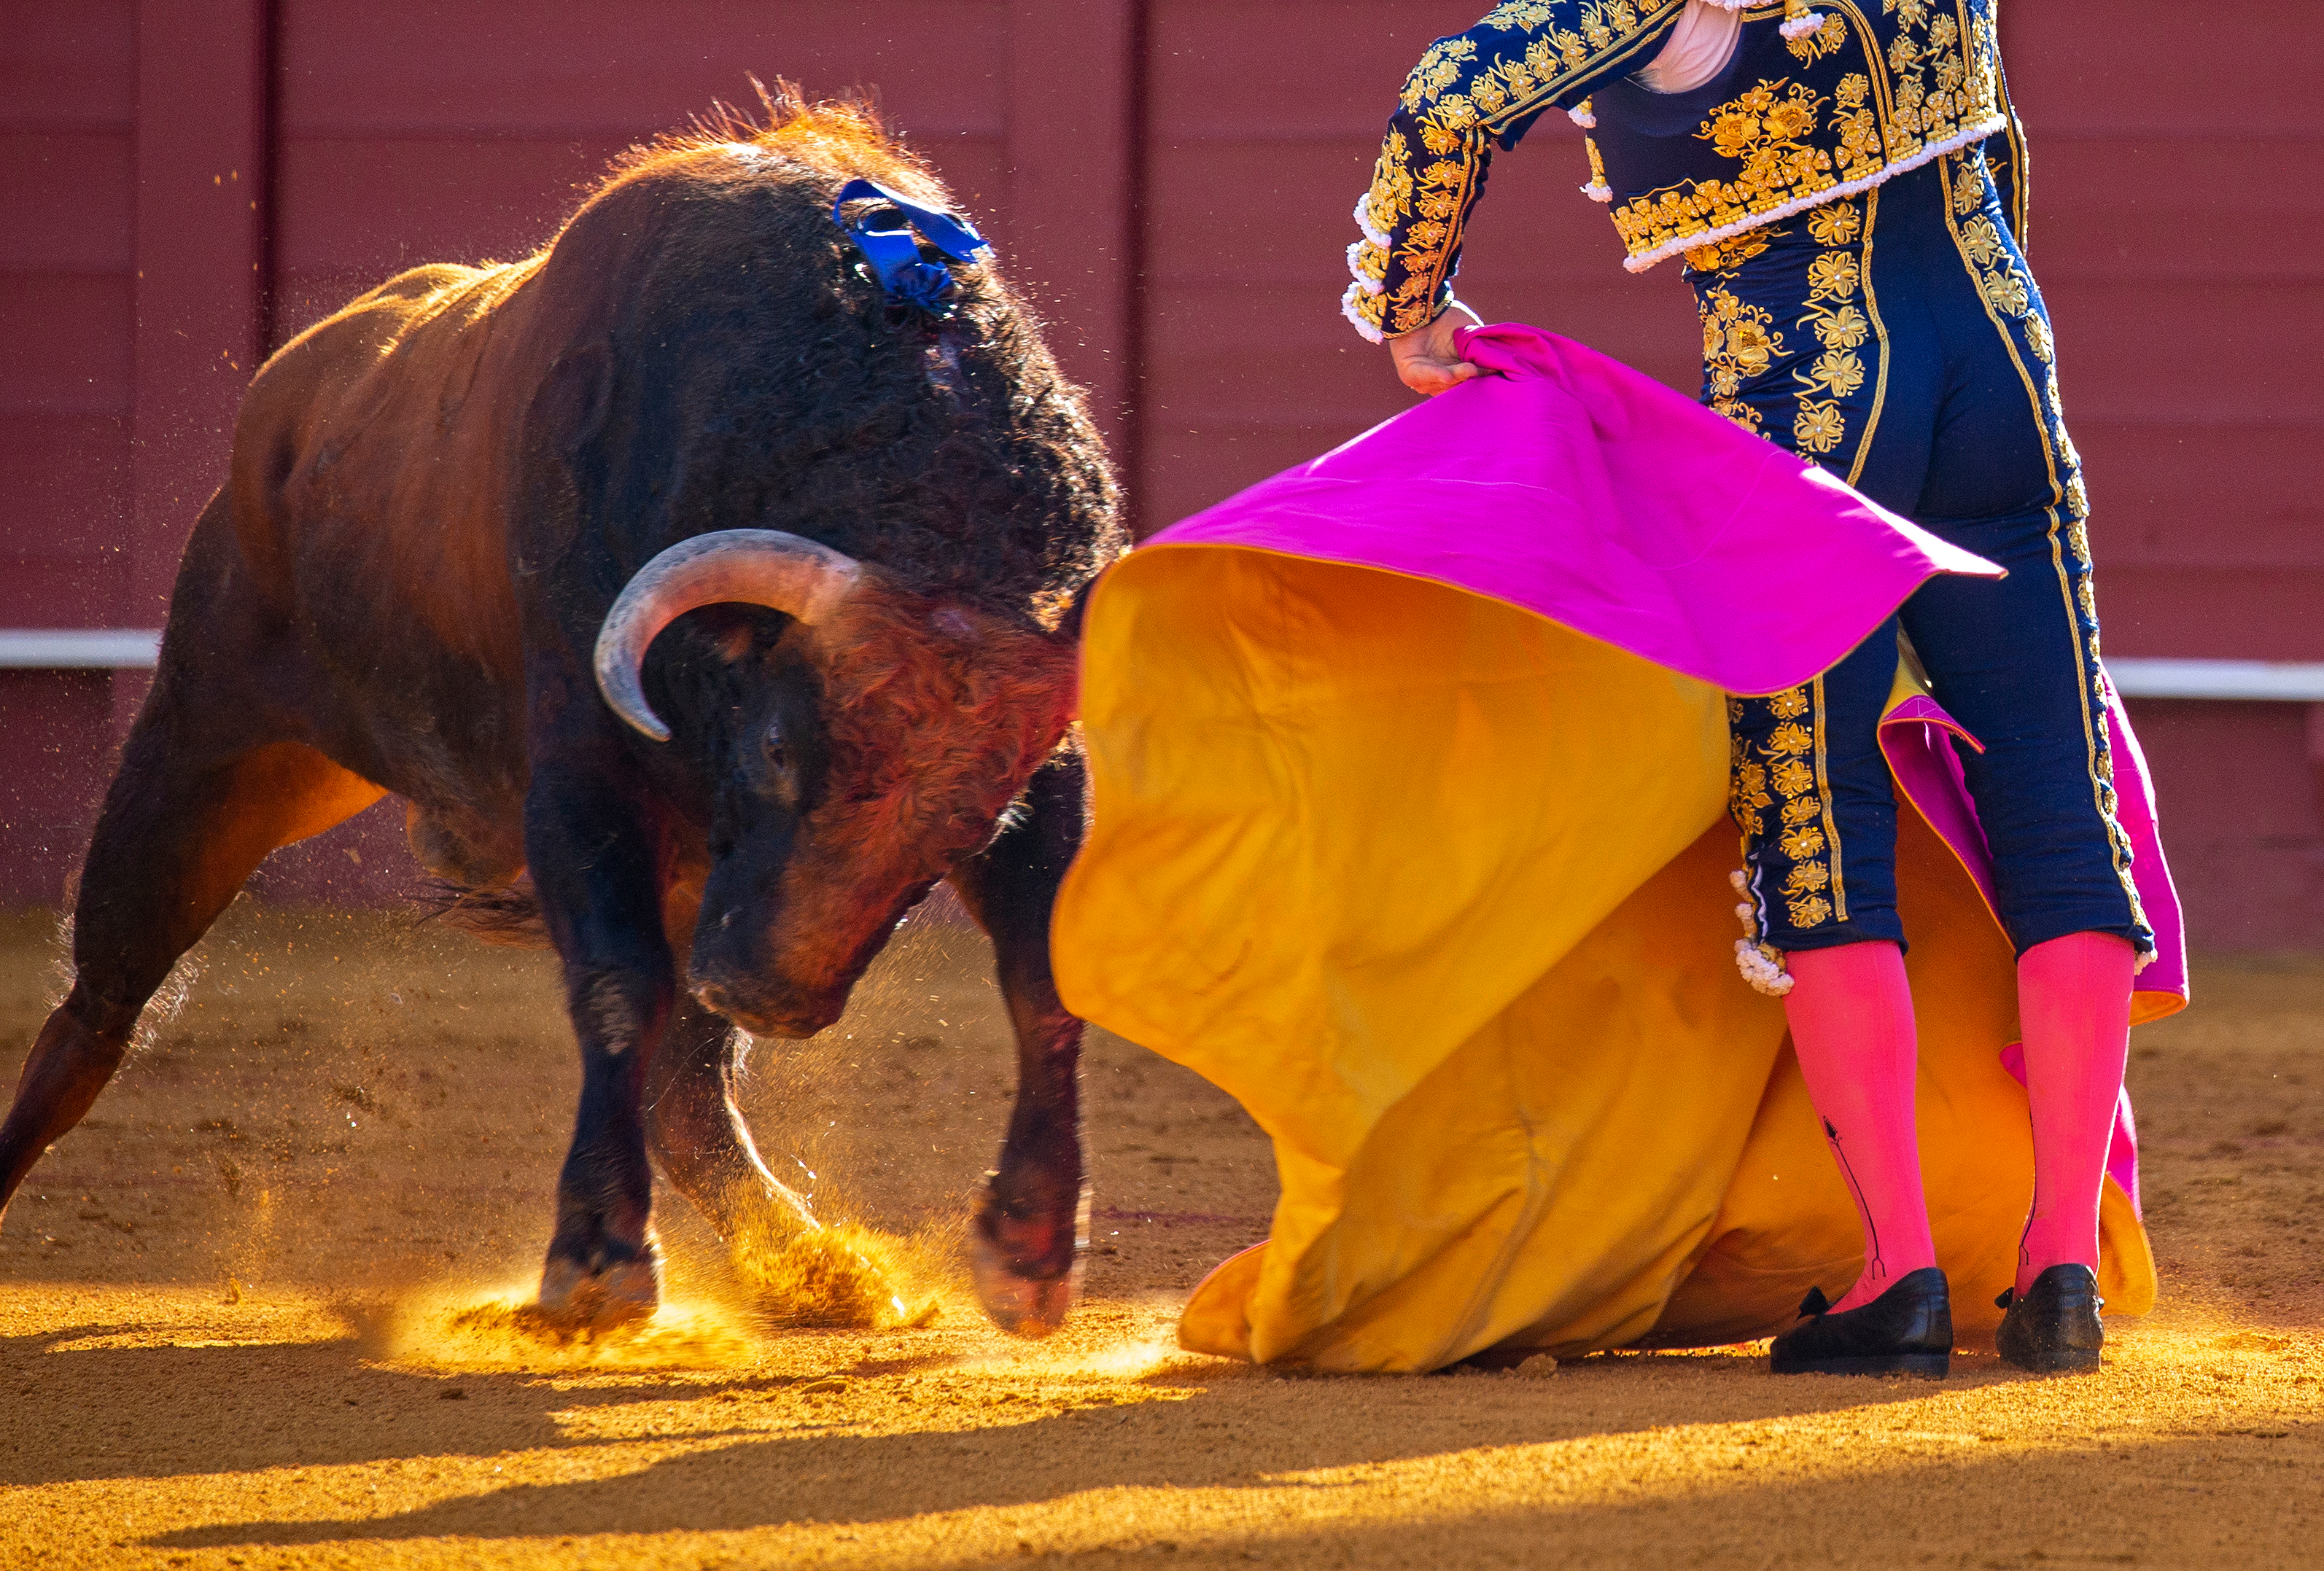 Catholic charity calls for an end to bullfighting